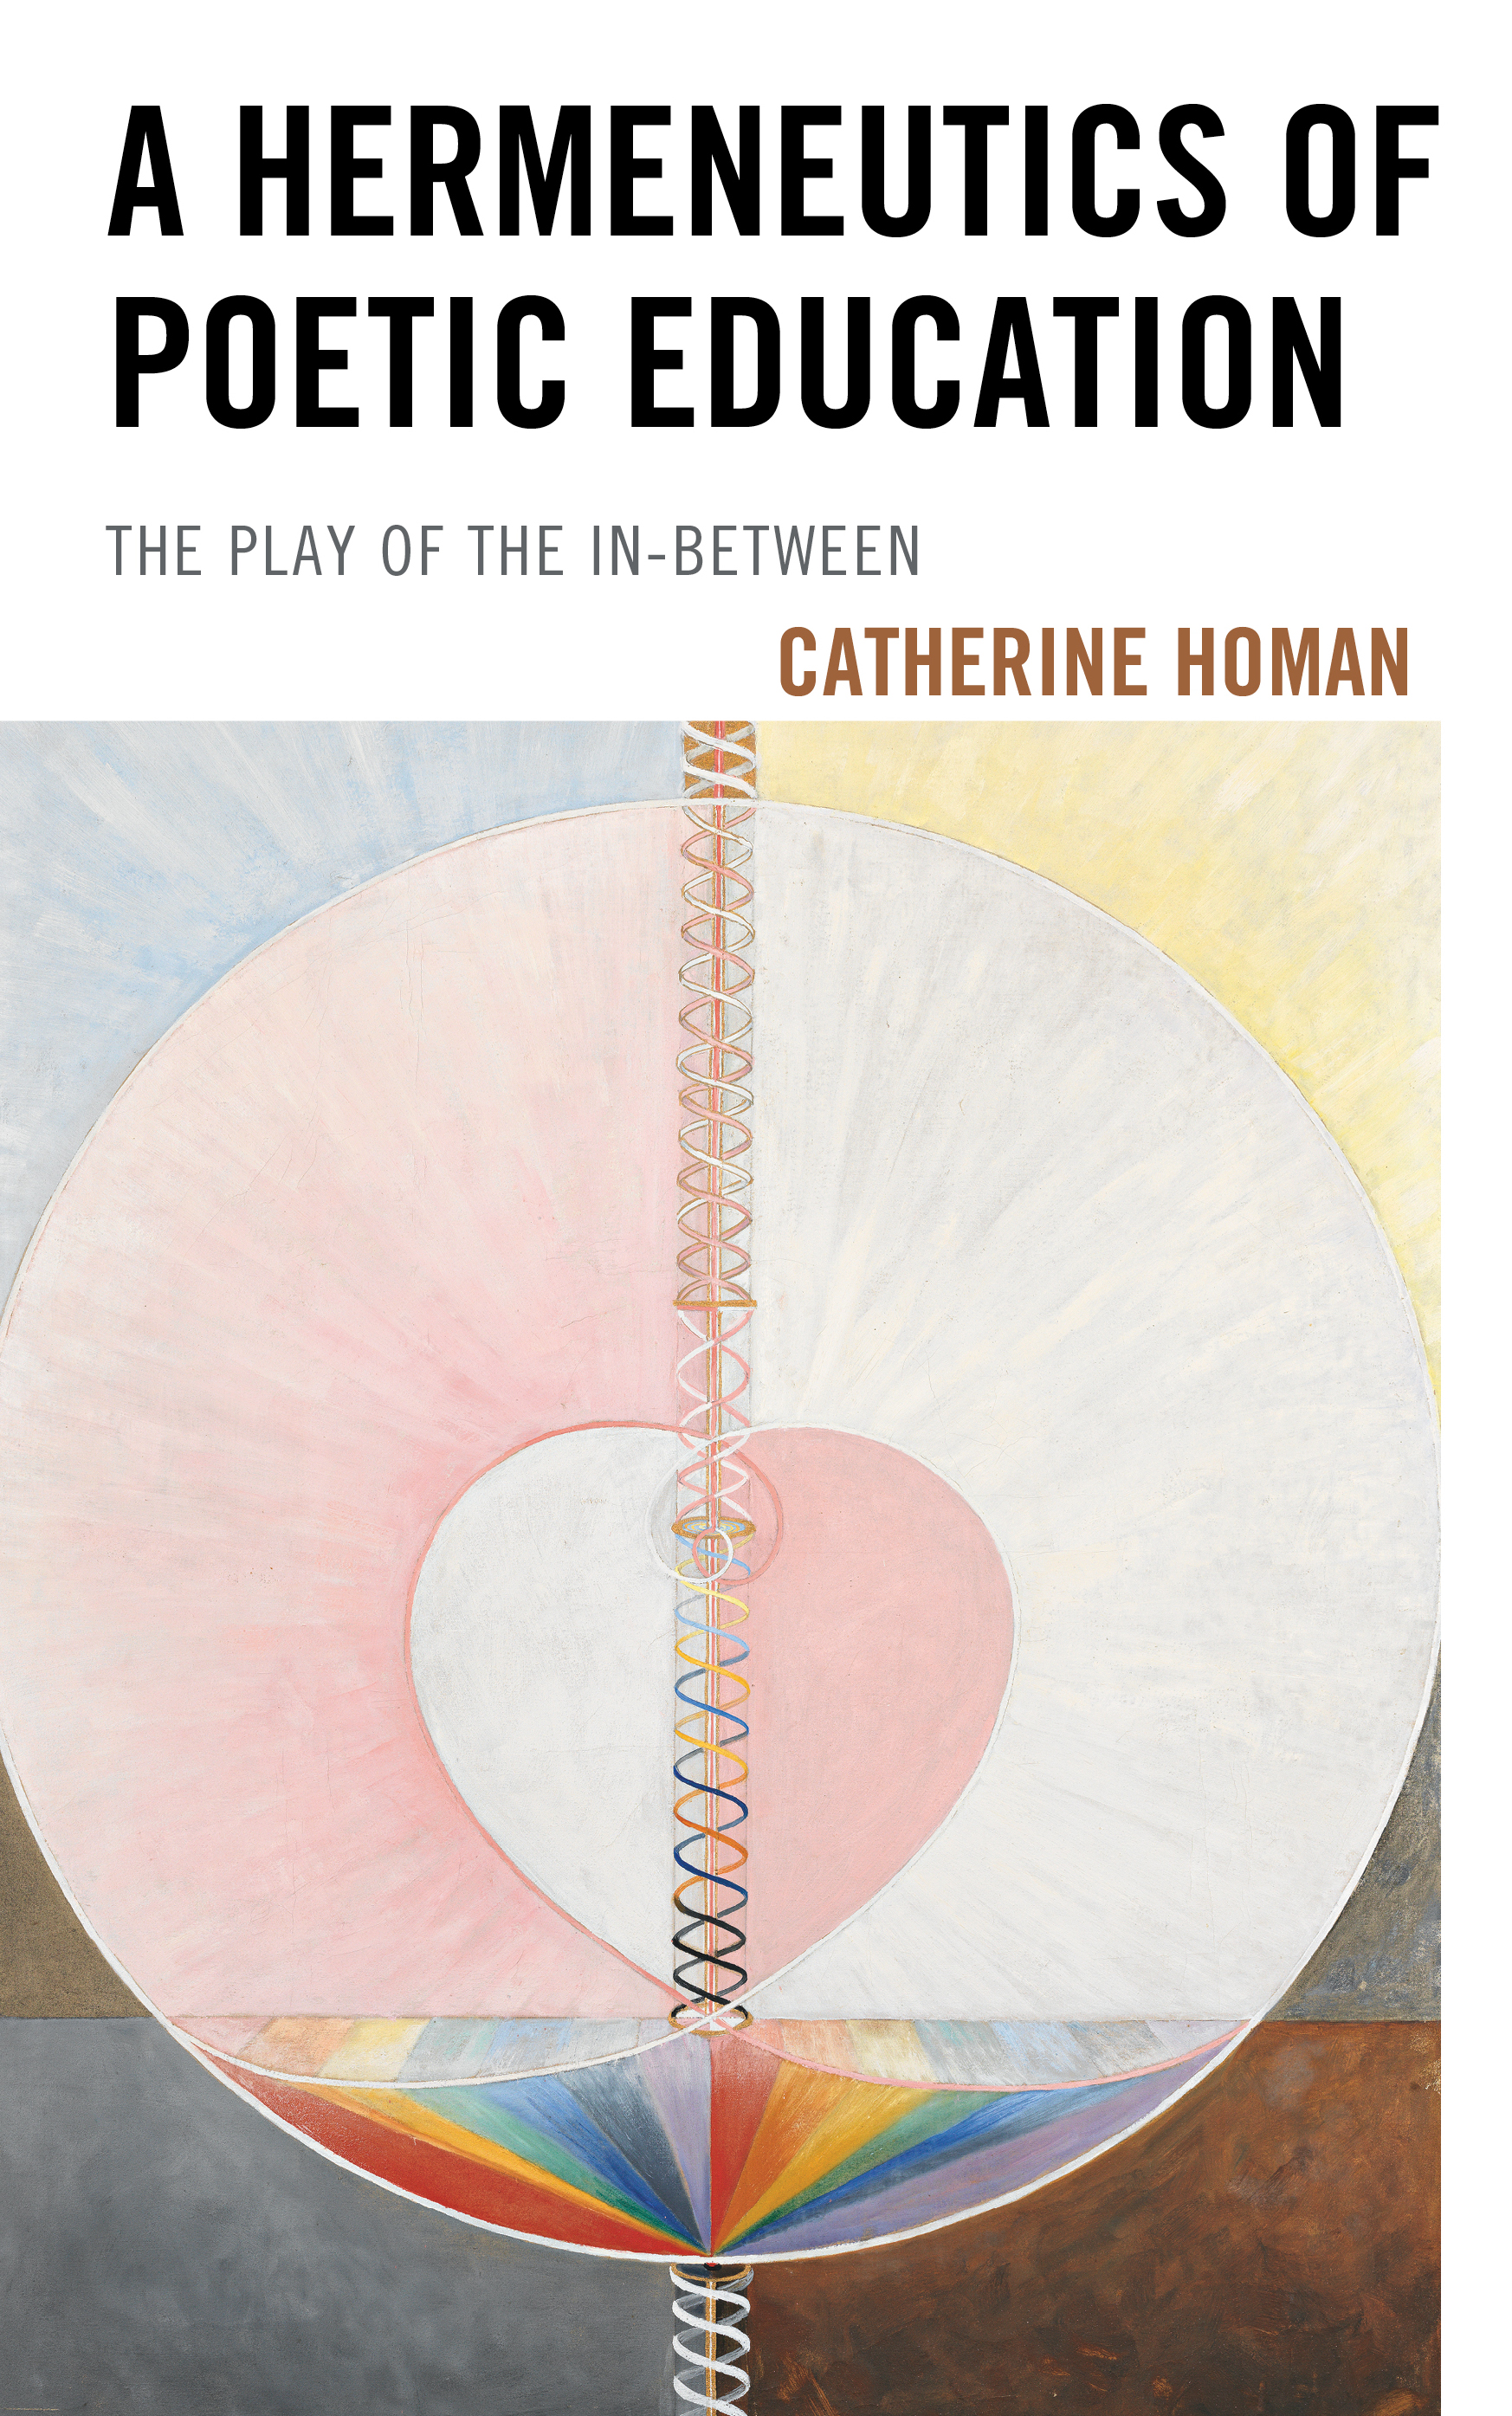 A Hermeneutics of Poetic Education: The Play of the In-Between